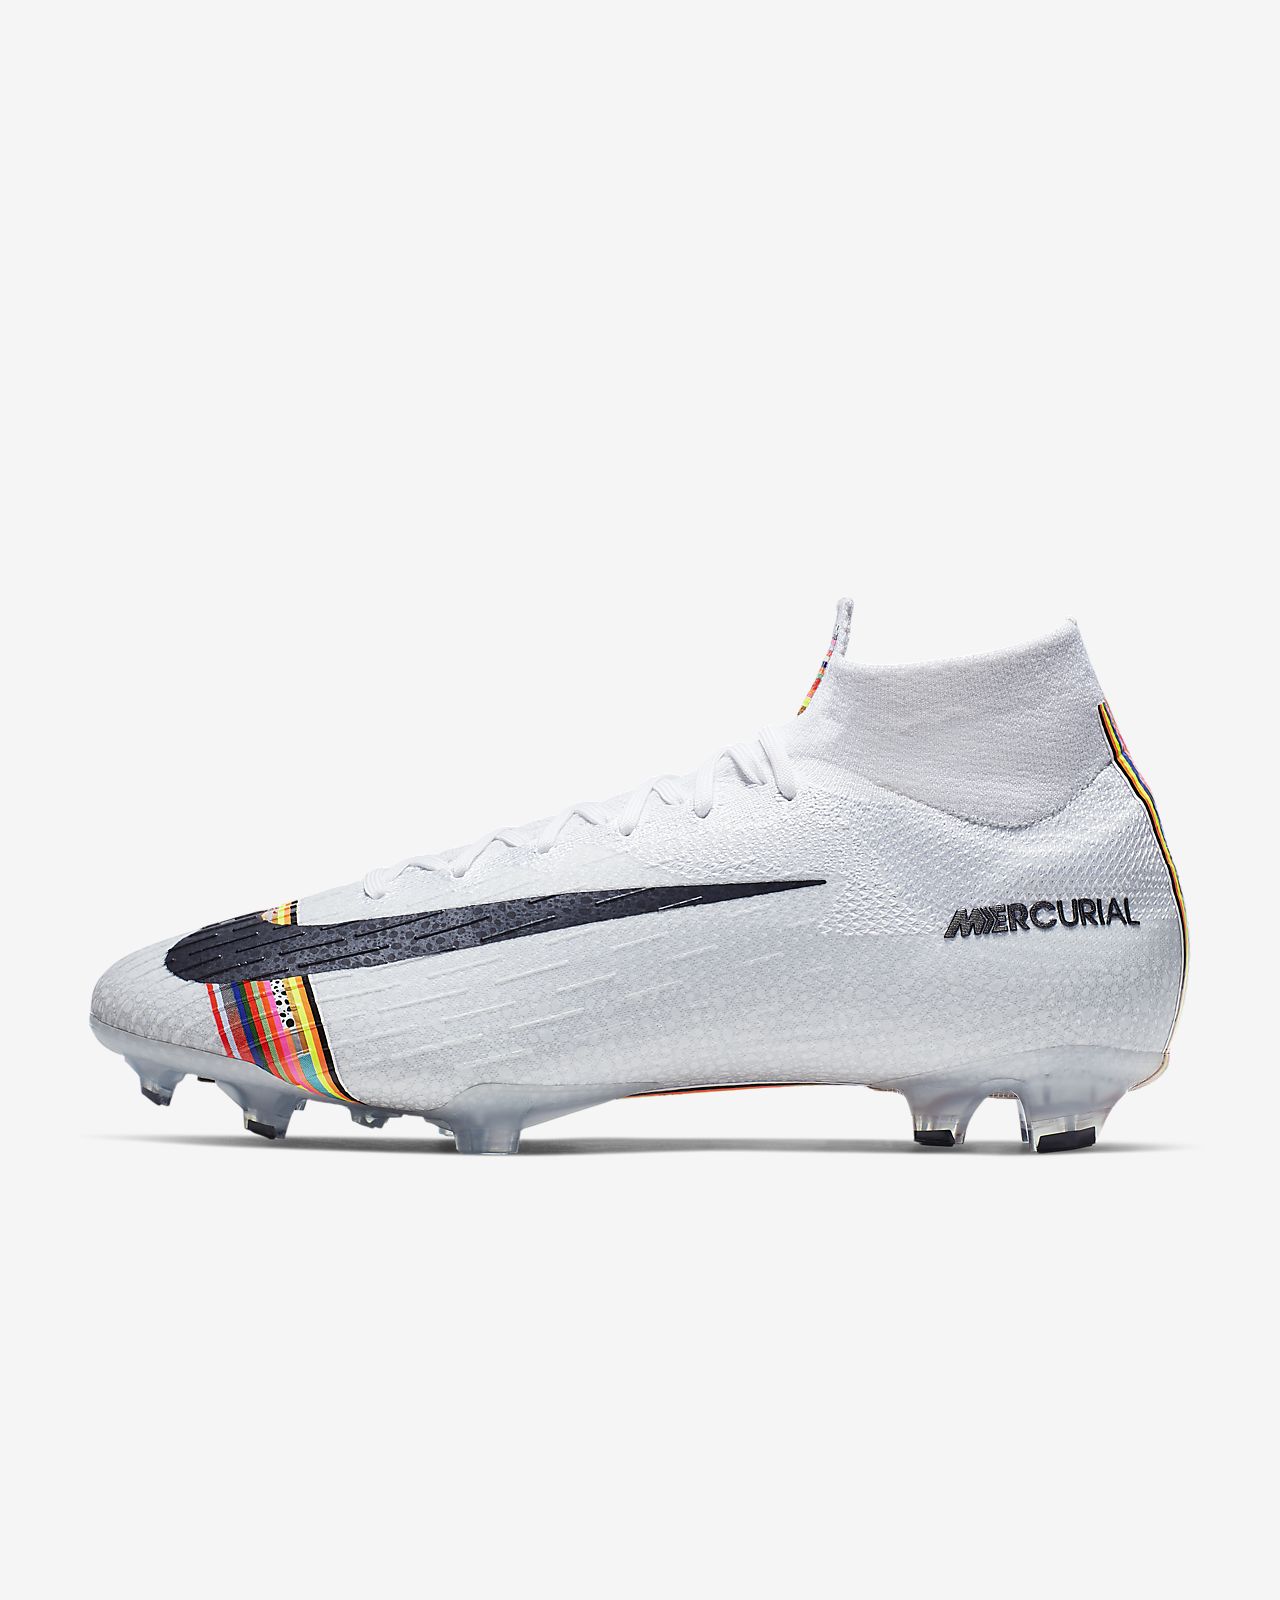 Nike Mercurial Superfly V DF FG. (Academy Pack). Shoes